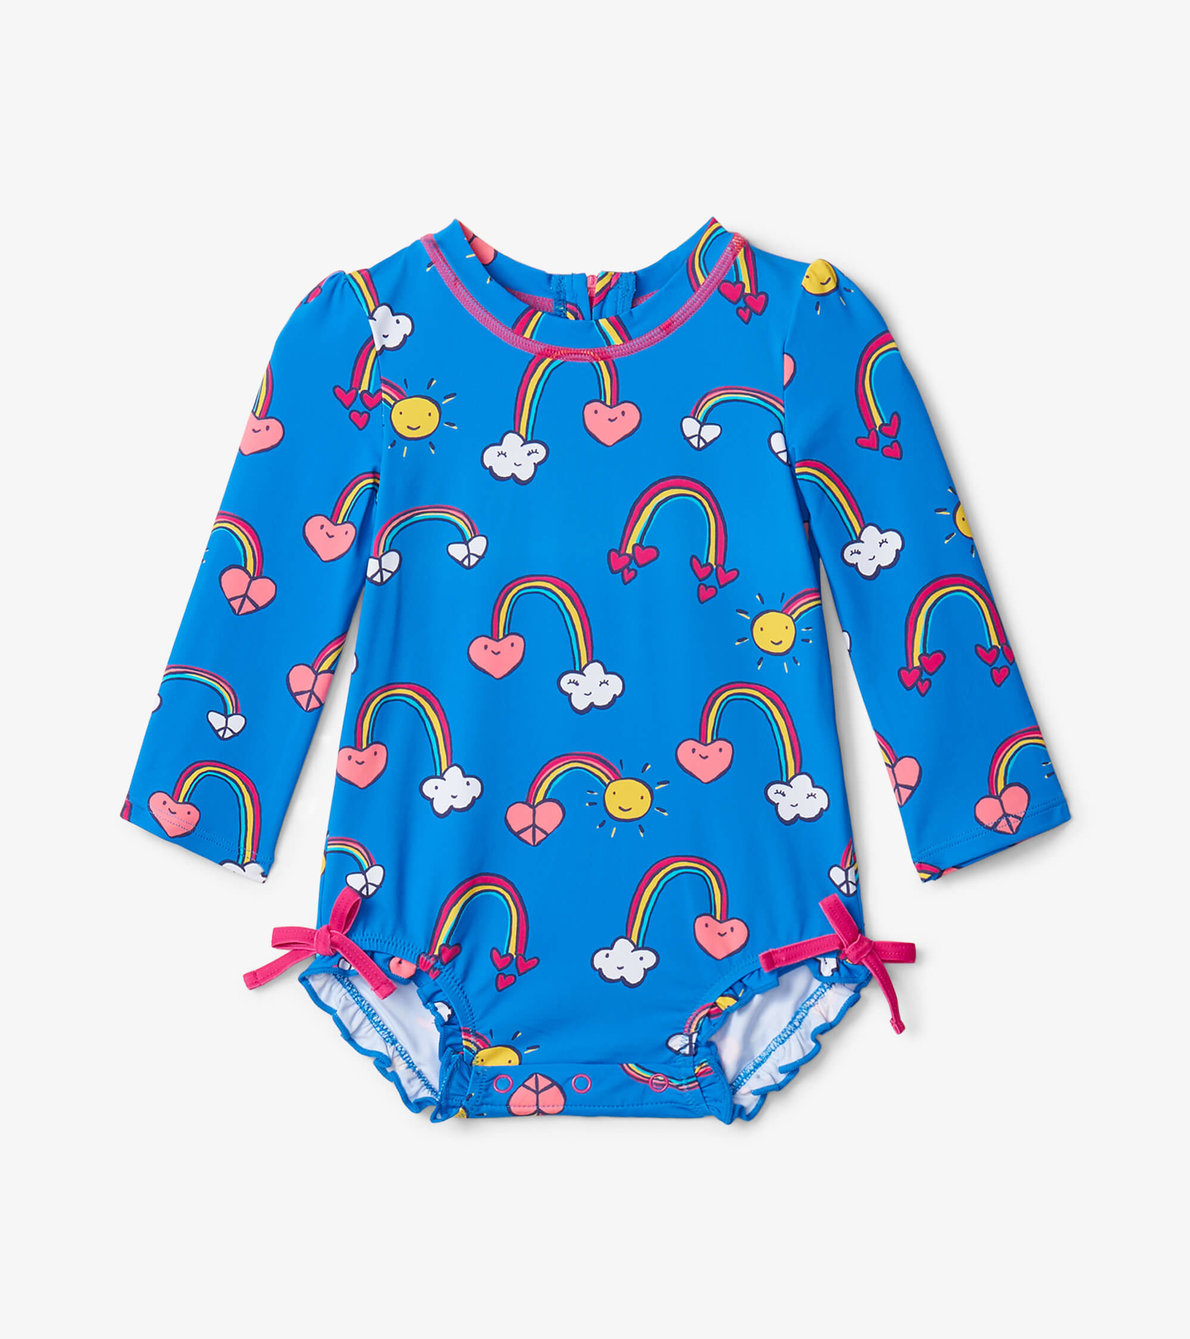 View larger image of Summer Sky Baby Rashguard Swimsuit